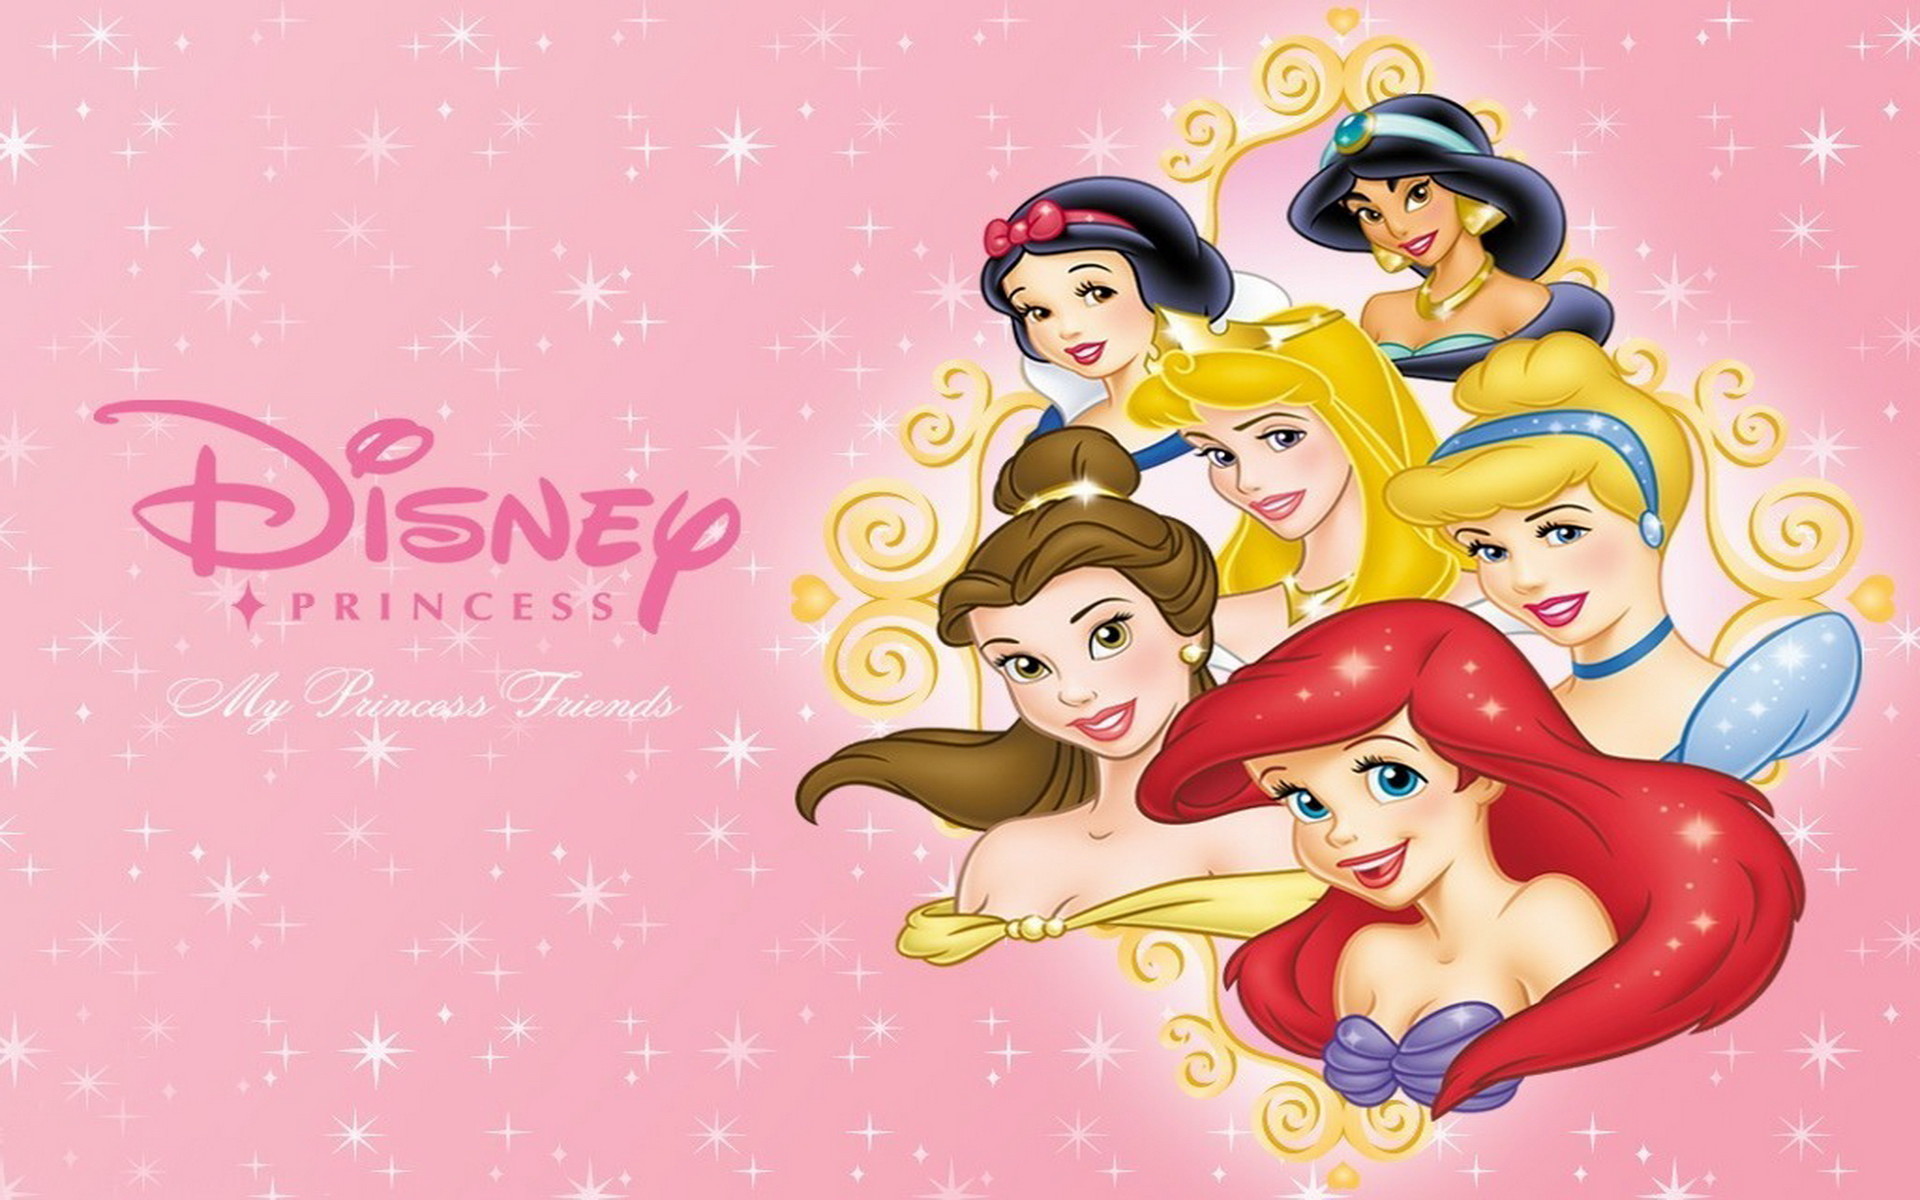 My Princess Friends Wallpapers